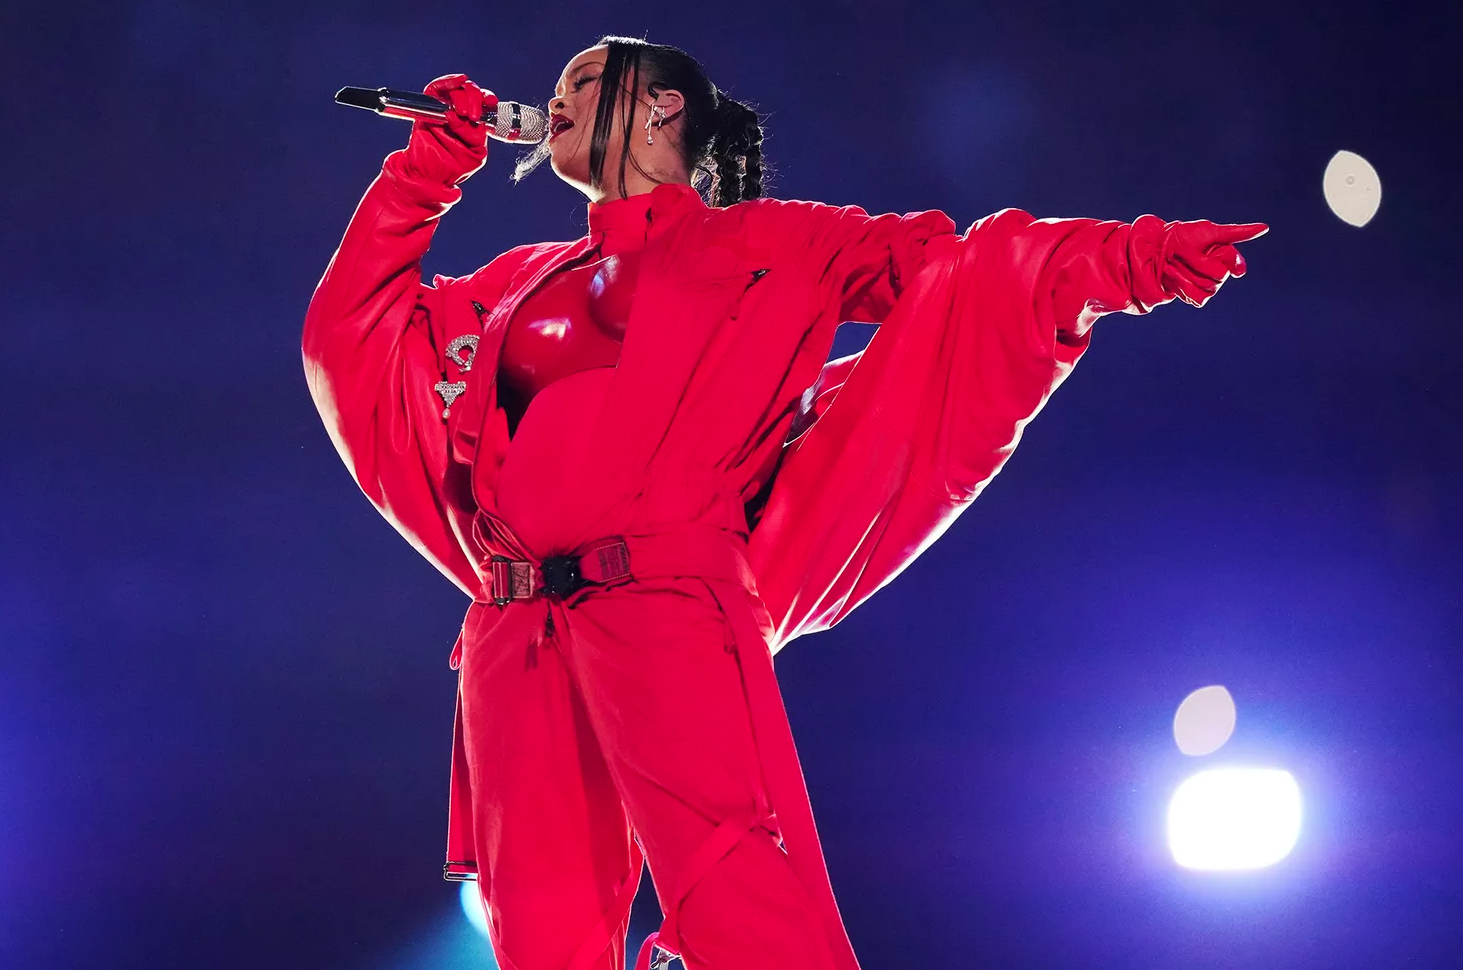 Rihanna Performs Her Greatest Hits on Aerial Platforms During the 2023 Super Bowl Halftime Show